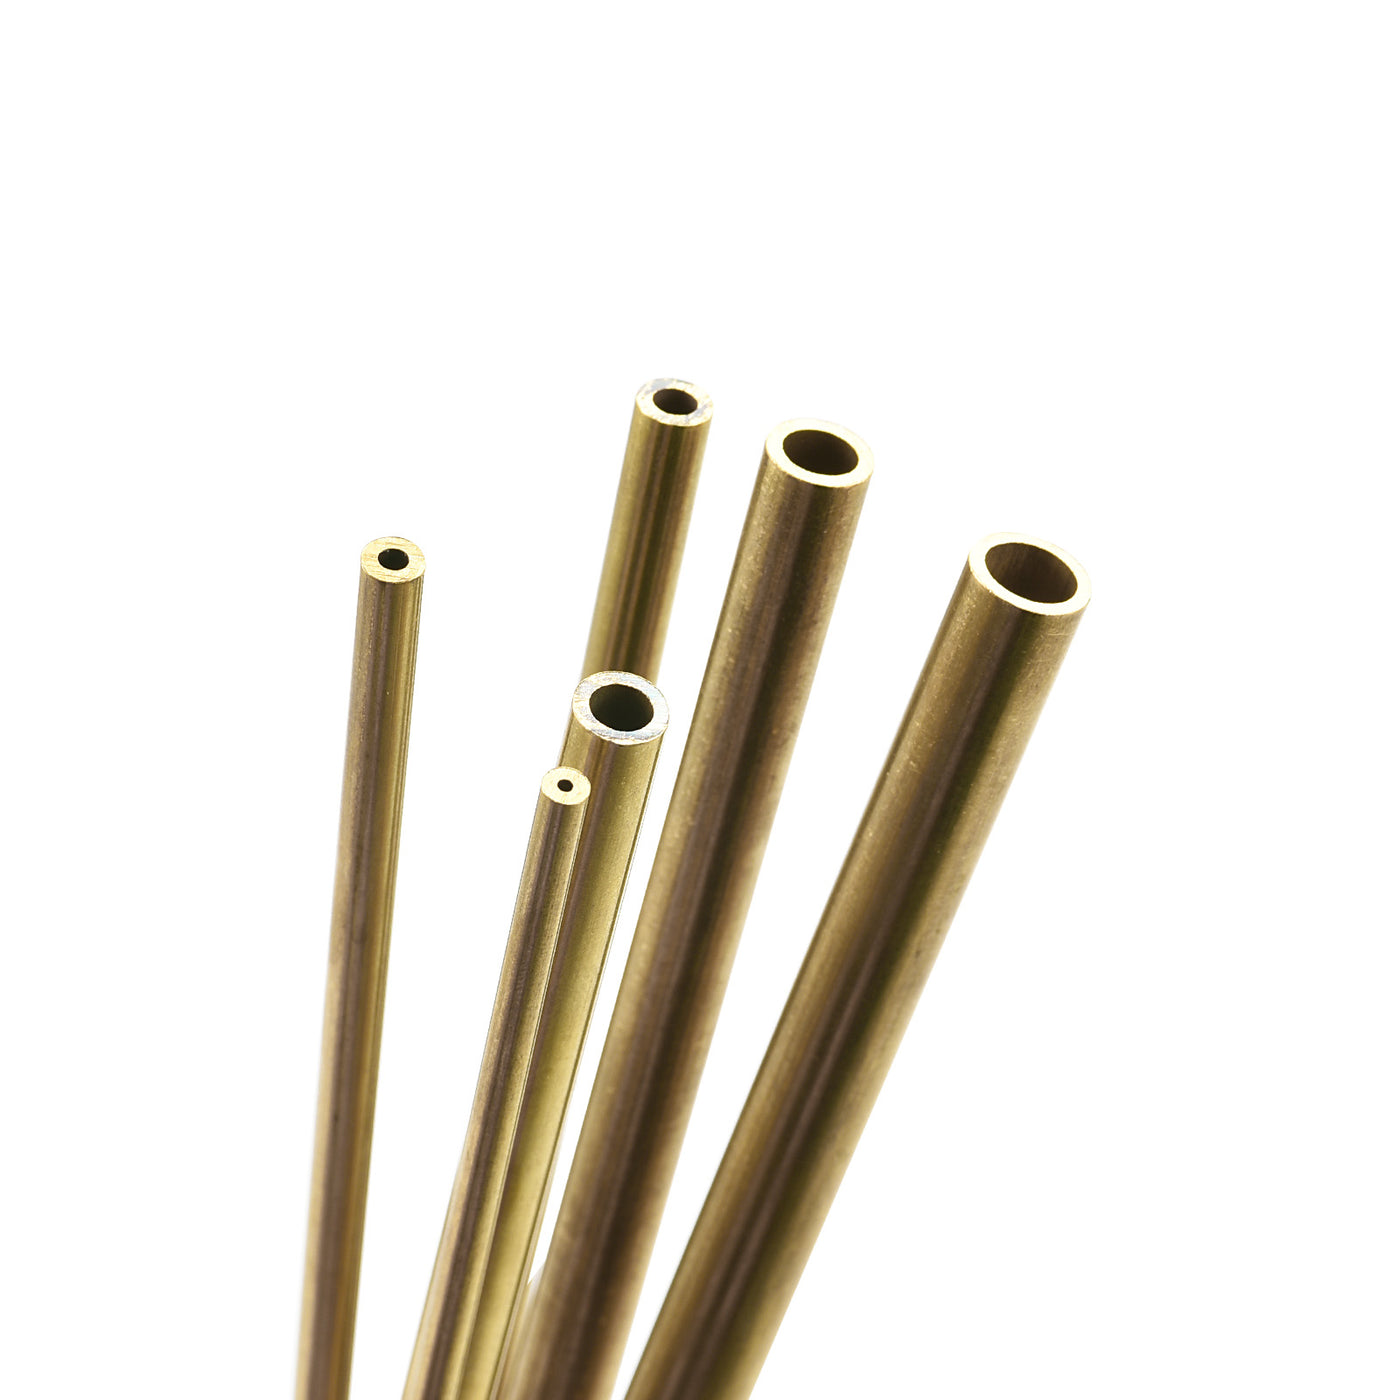 uxcell Uxcell Brass Tube, 7mm 8mm 9mm 10mm 11mm 12mm OD x 0.5mm Wall Thickness 200mm Length Metal Tubing, Pack of 6